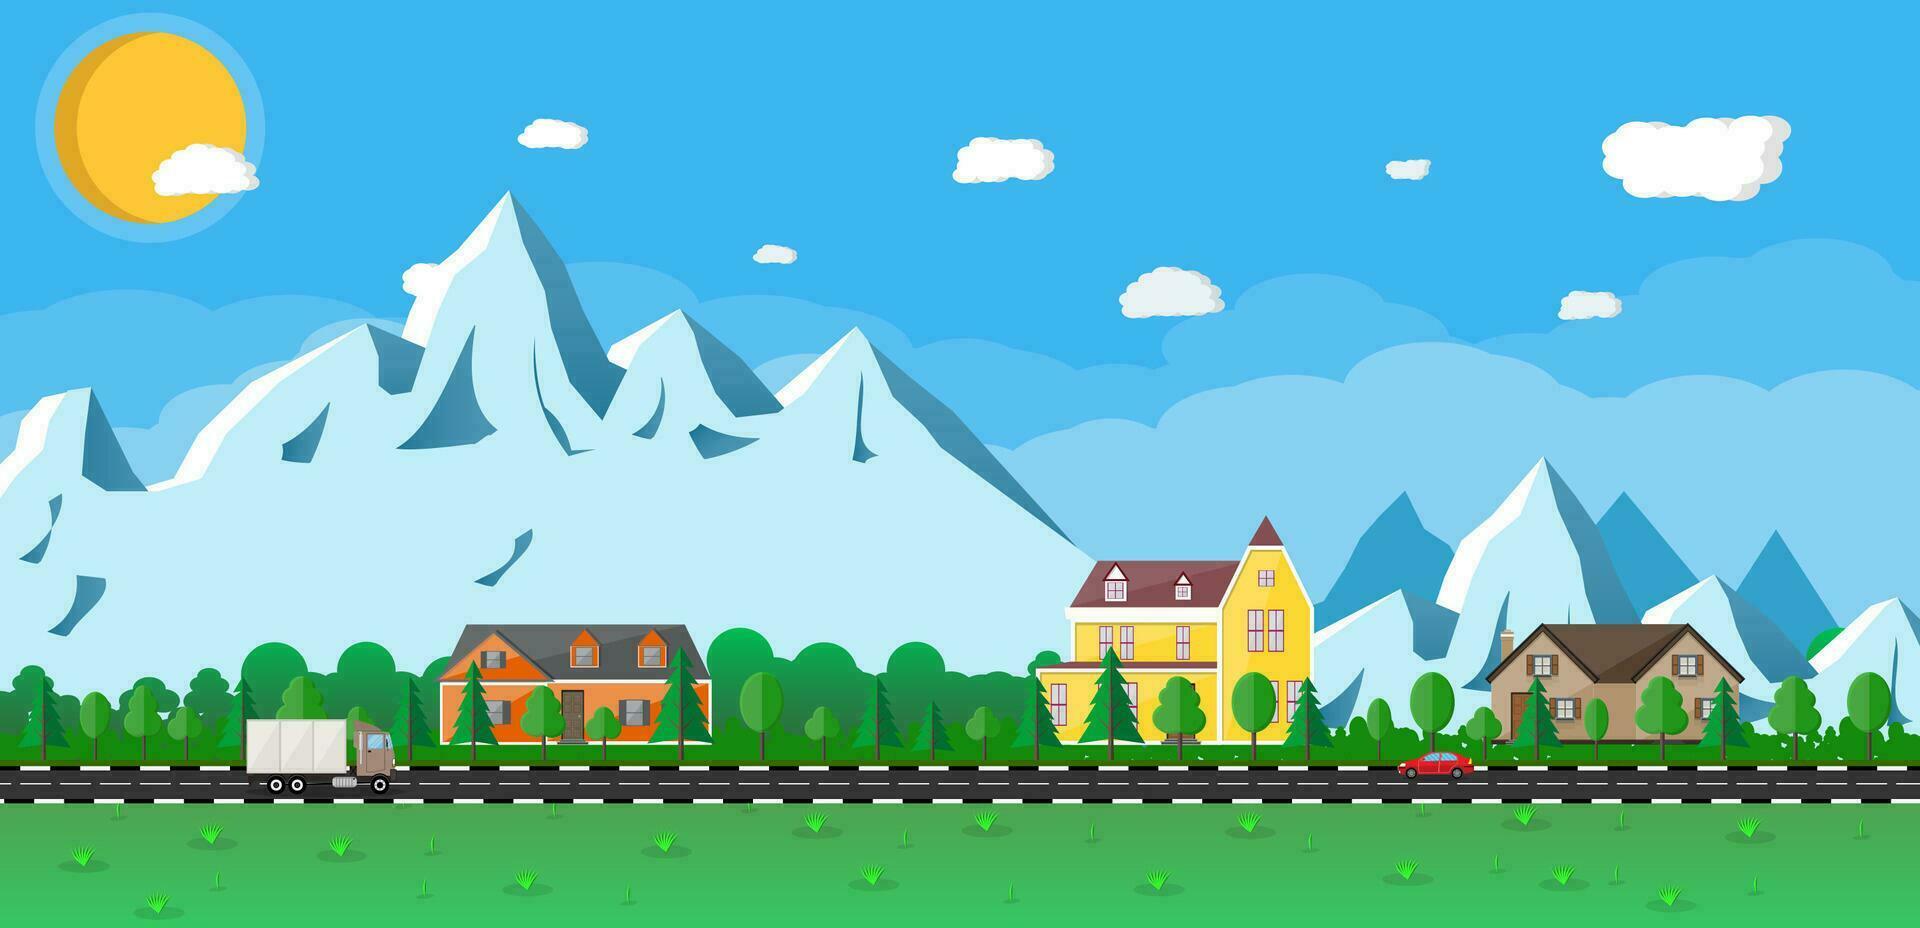 Small village landscape. Wooden houses in the mountains among the trees. road with cars. blue sky with sun and clouds. vector illustration in flat tyle